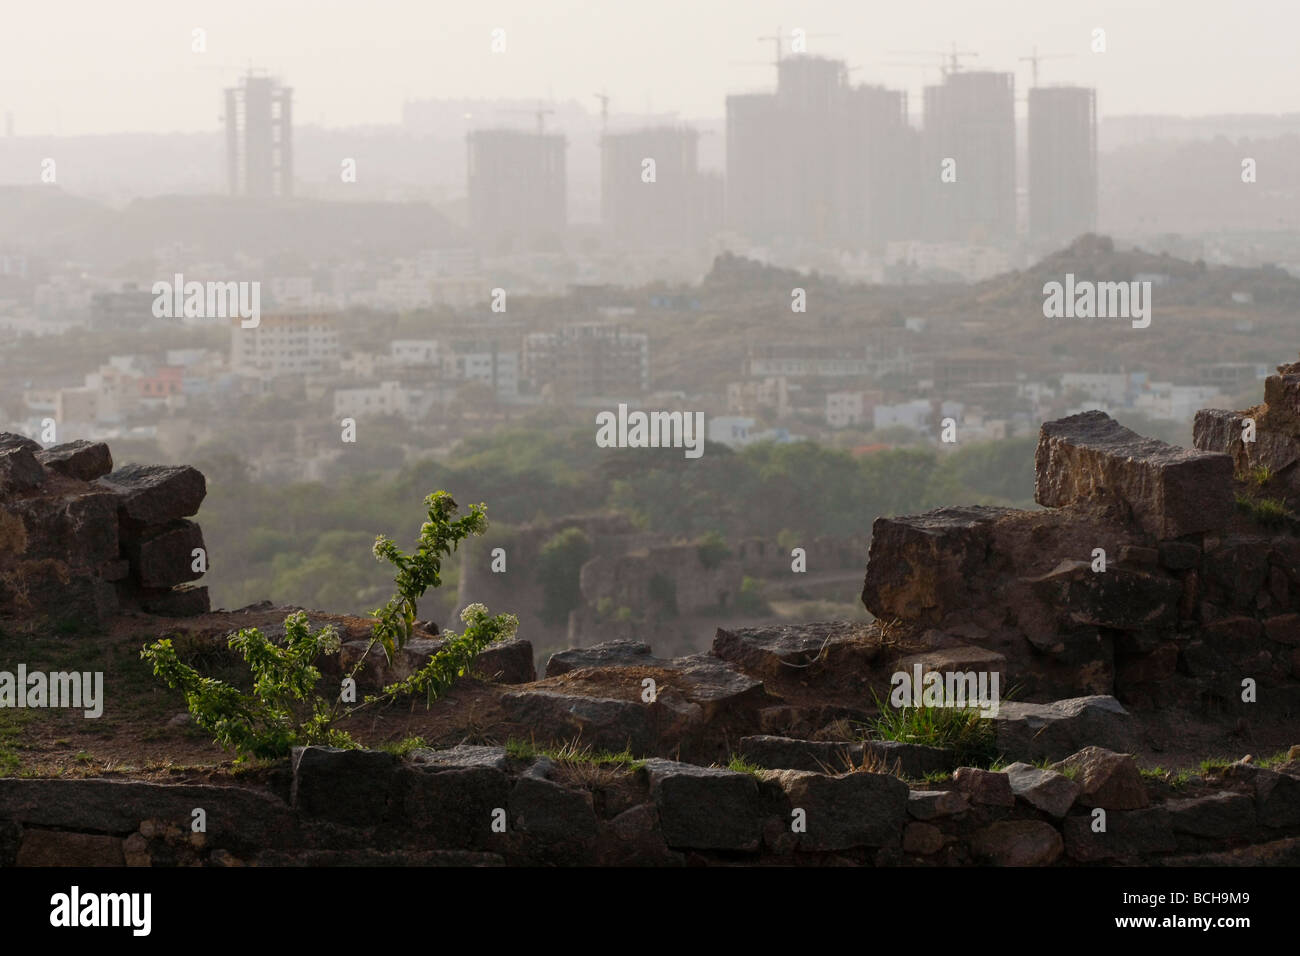 A view from the Golconda Fort of large residential complexes under construction in Hyderabad in India. Stock Photo